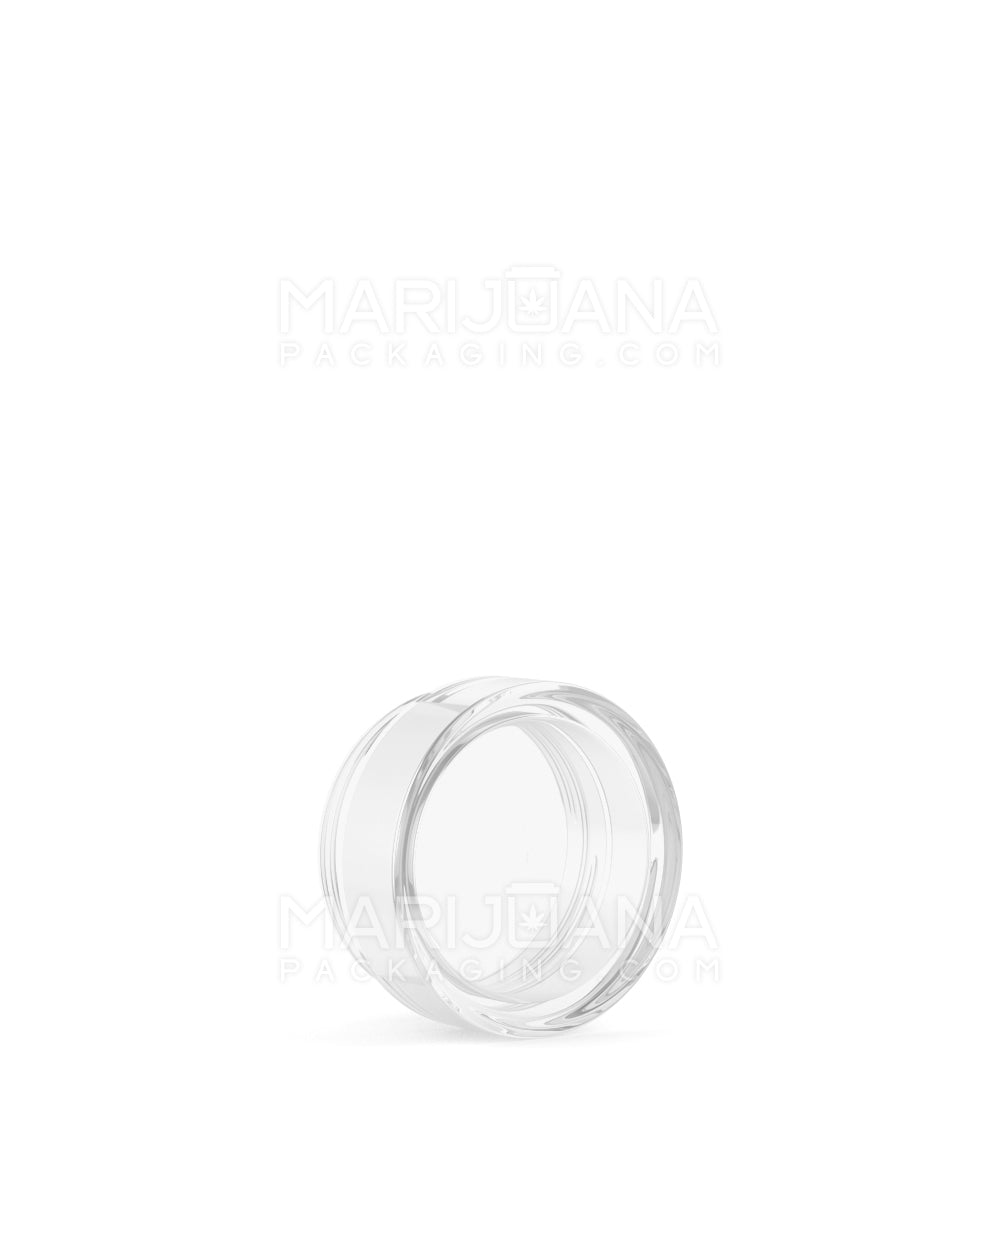 Clear Concentrate Containers w/ Screw Top Cap | 5mL - Plastic | Sample - 7